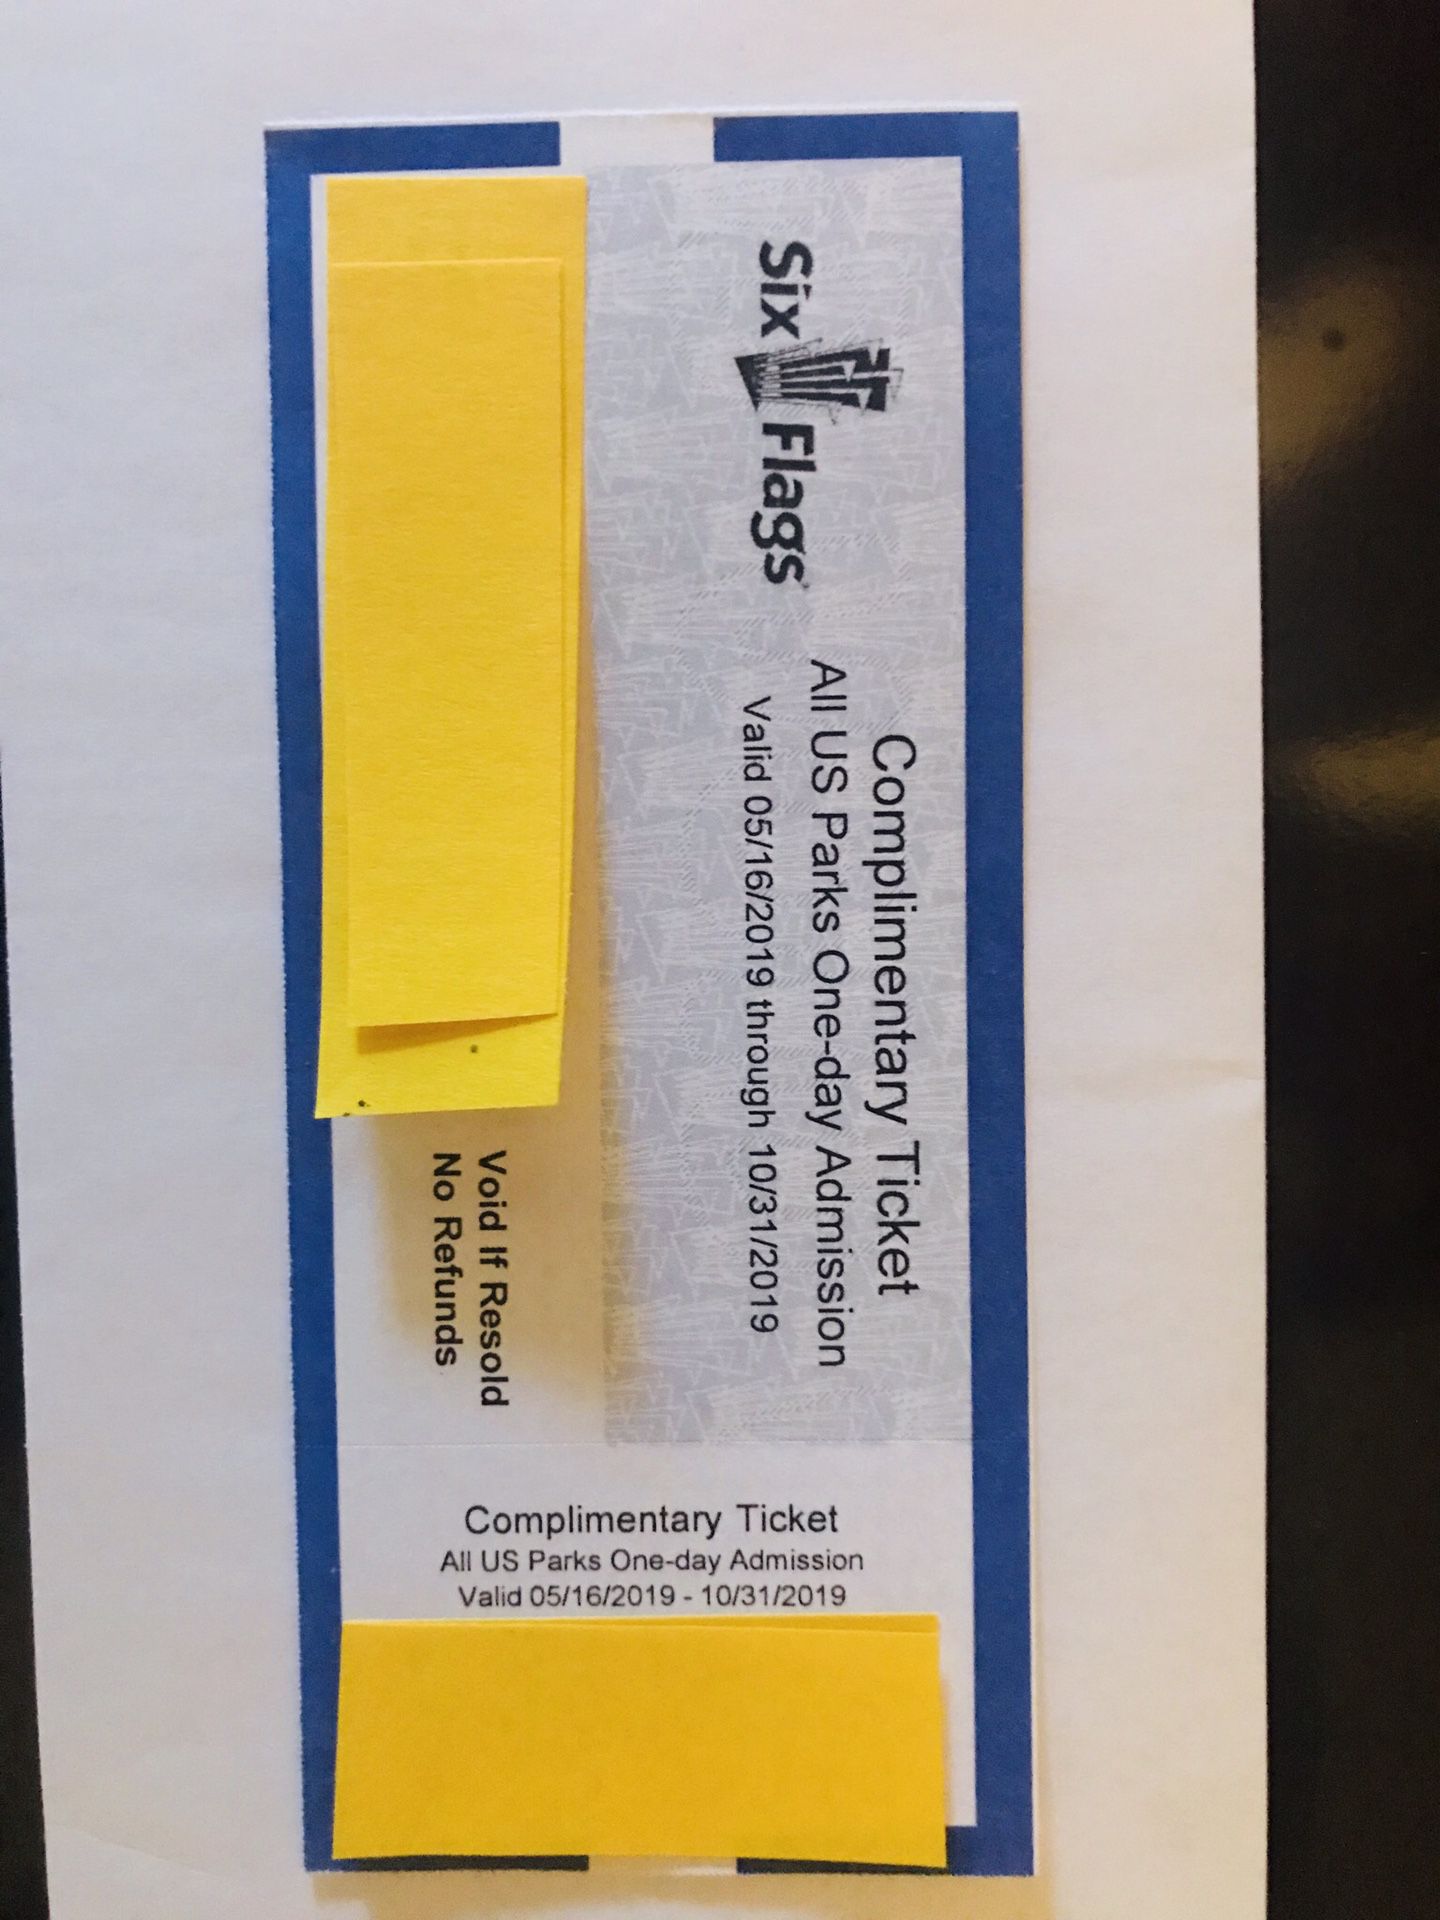 SIX FLAGS COMPLIMENTARY TICKET! ALL US PARKS ONE-DAY ADMISSION! VALID UNTILL 10/31/2019. PRICE IS $30.